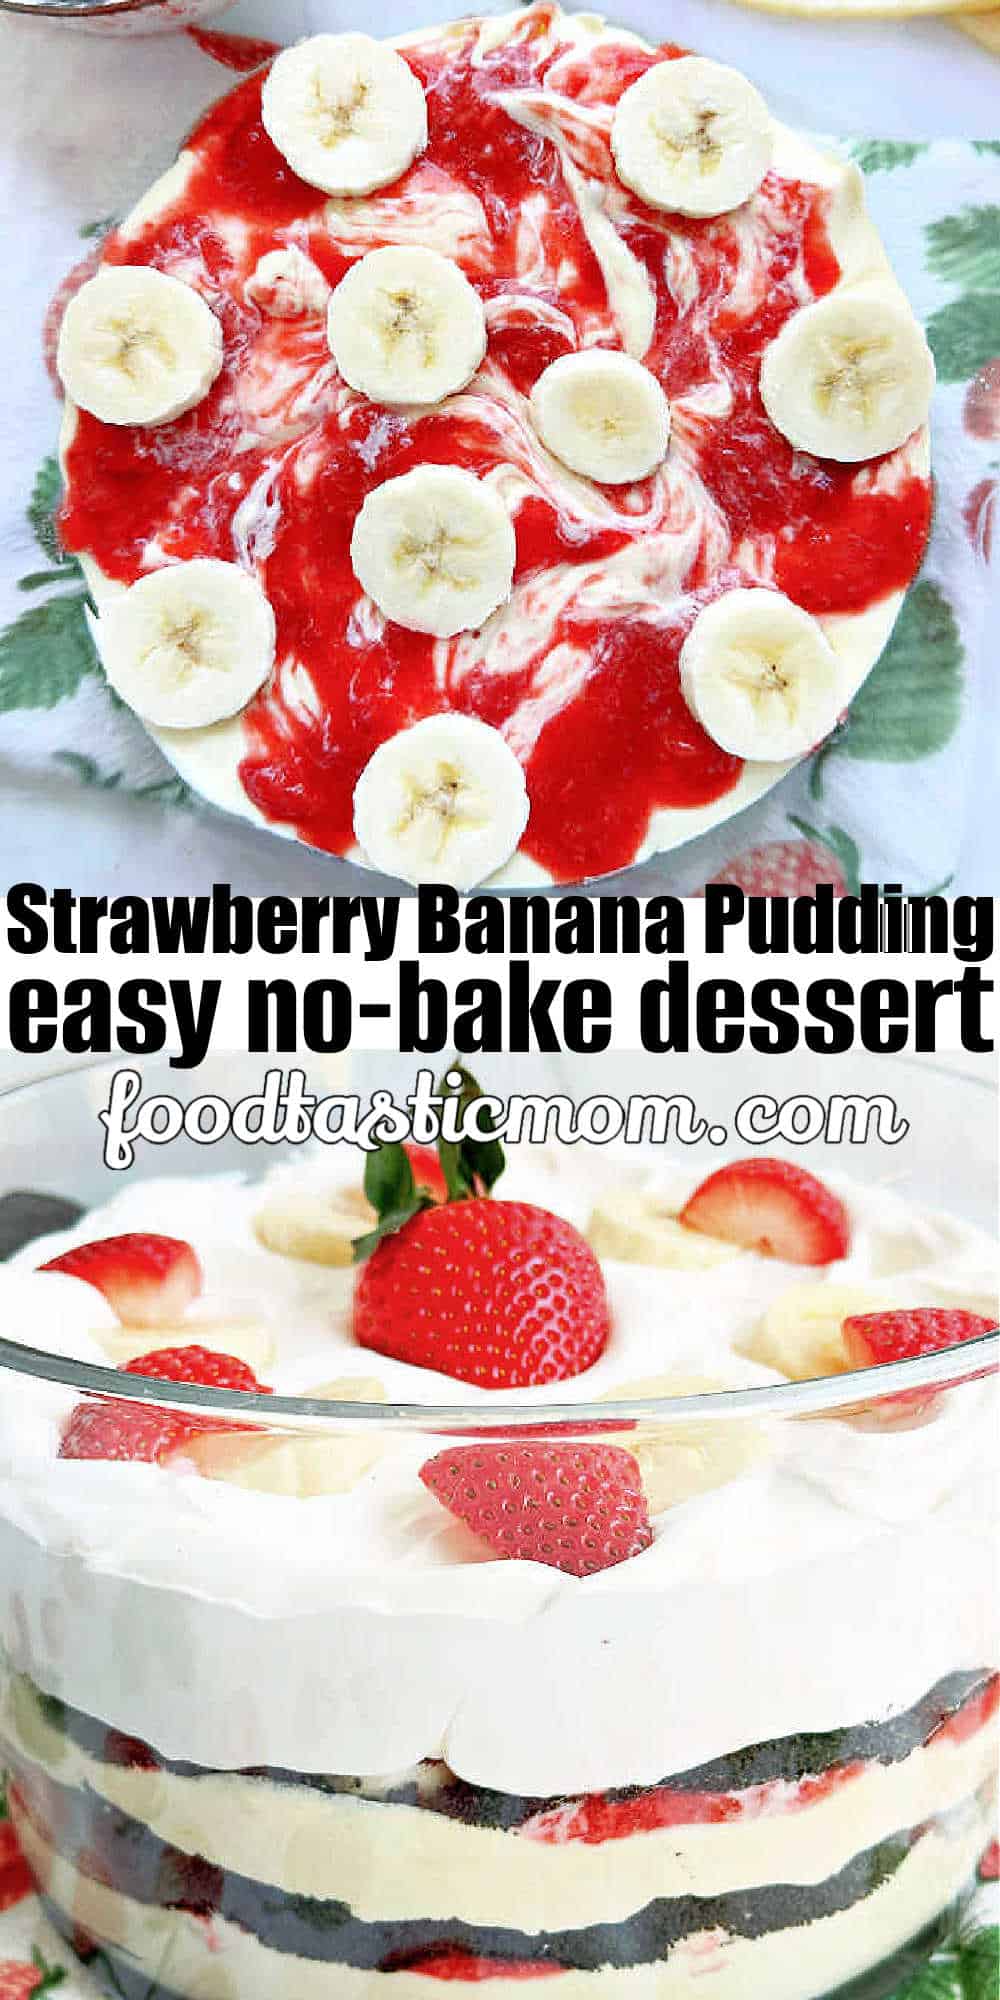 pin 1 for pinterest for strawberry banana pudding via @foodtasticmom